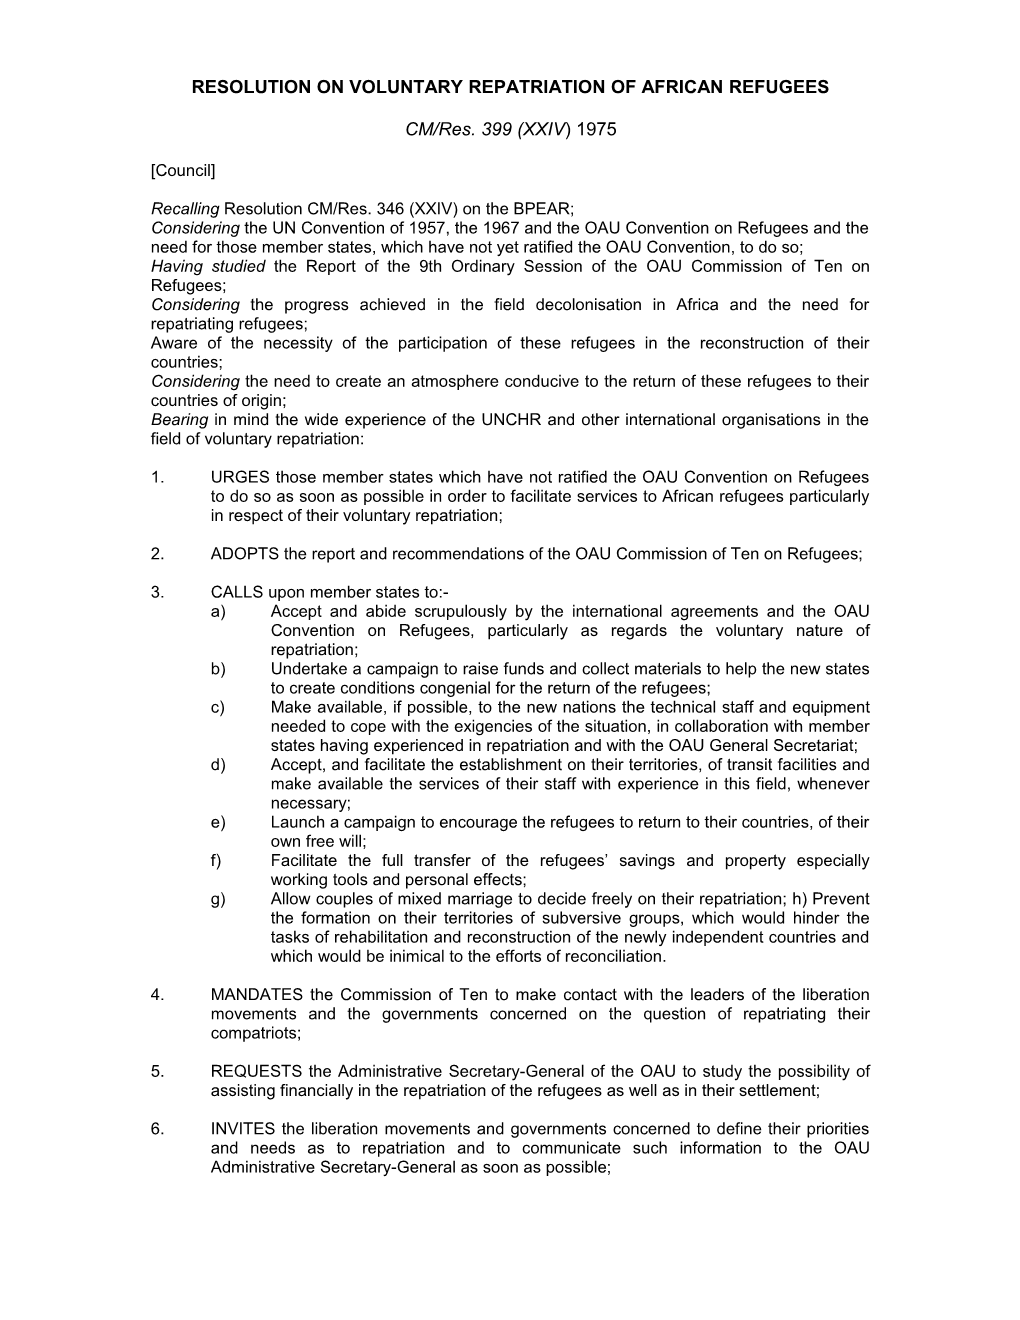 Resolution on Voluntary Repatriation of African Refugees